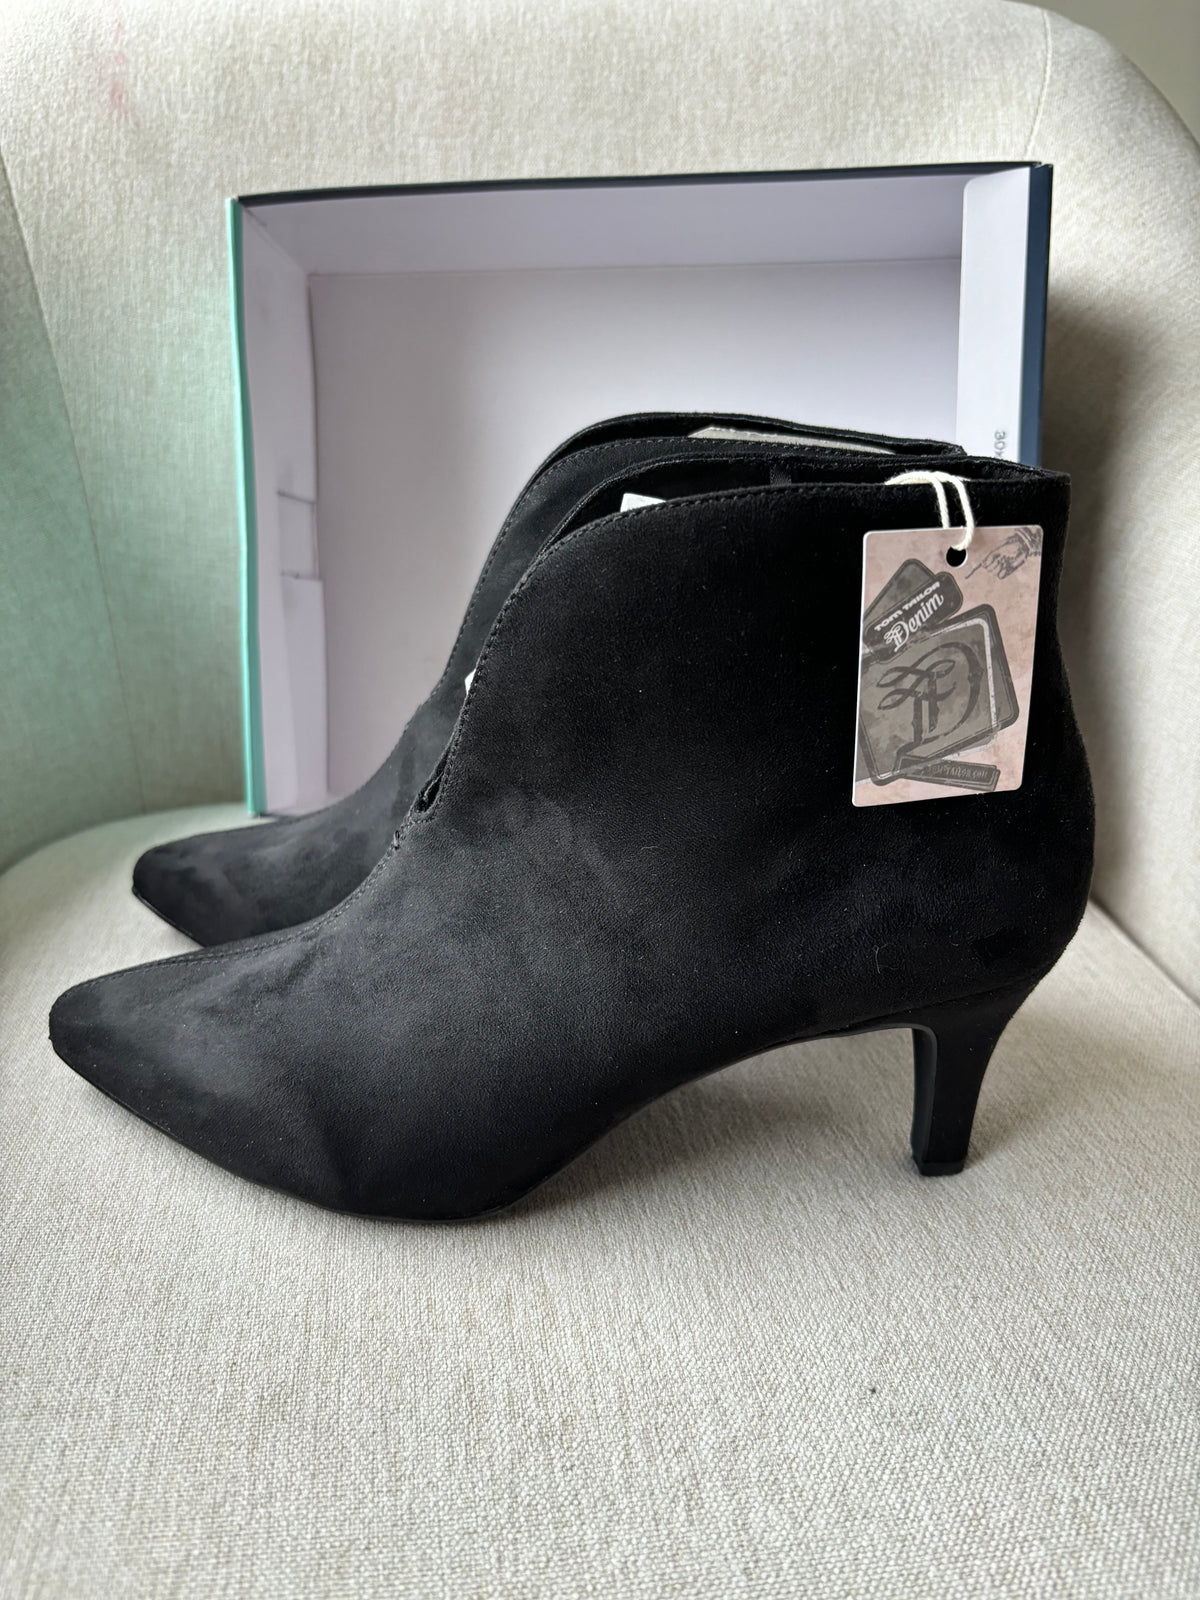 Black ankle boots by Tom Tailor